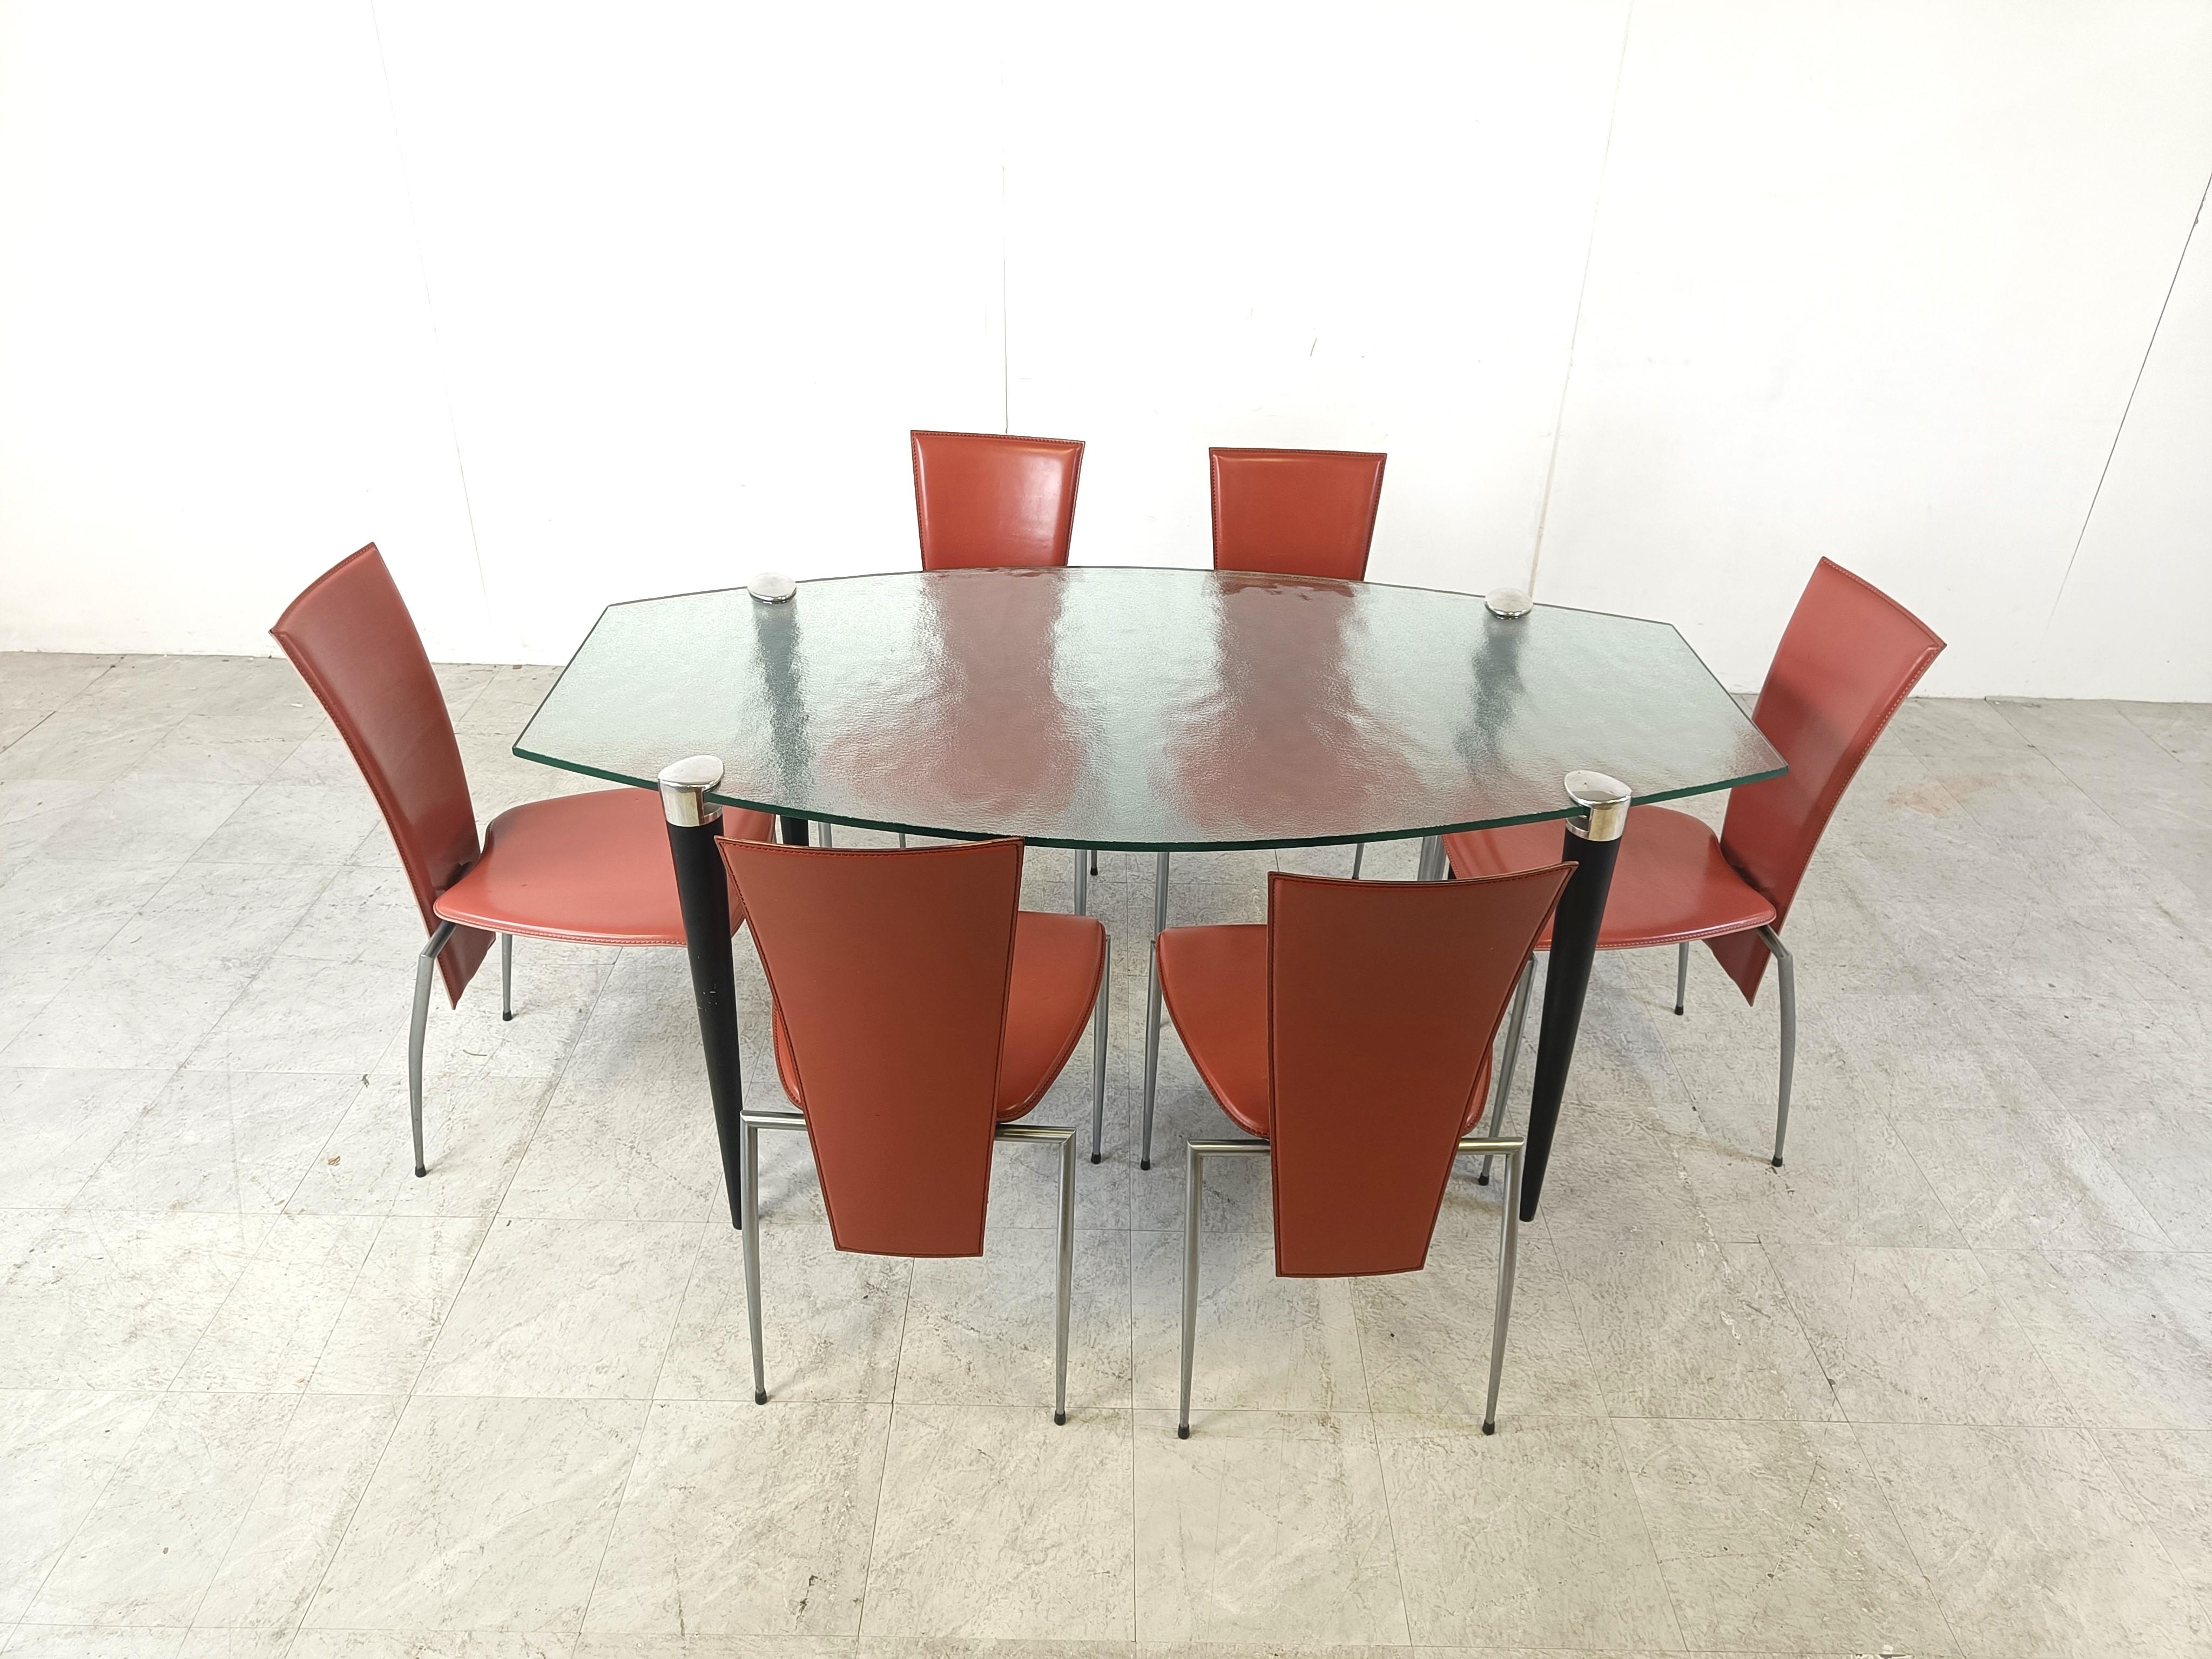 1990s italian design dining table consisting of a nicely shaped frozen glass table top and wooden and chromed conical legs.

The legs clamp the table top thanks to a single screw on each leg.

Timeless and elegant design

Good condition.

1990s -